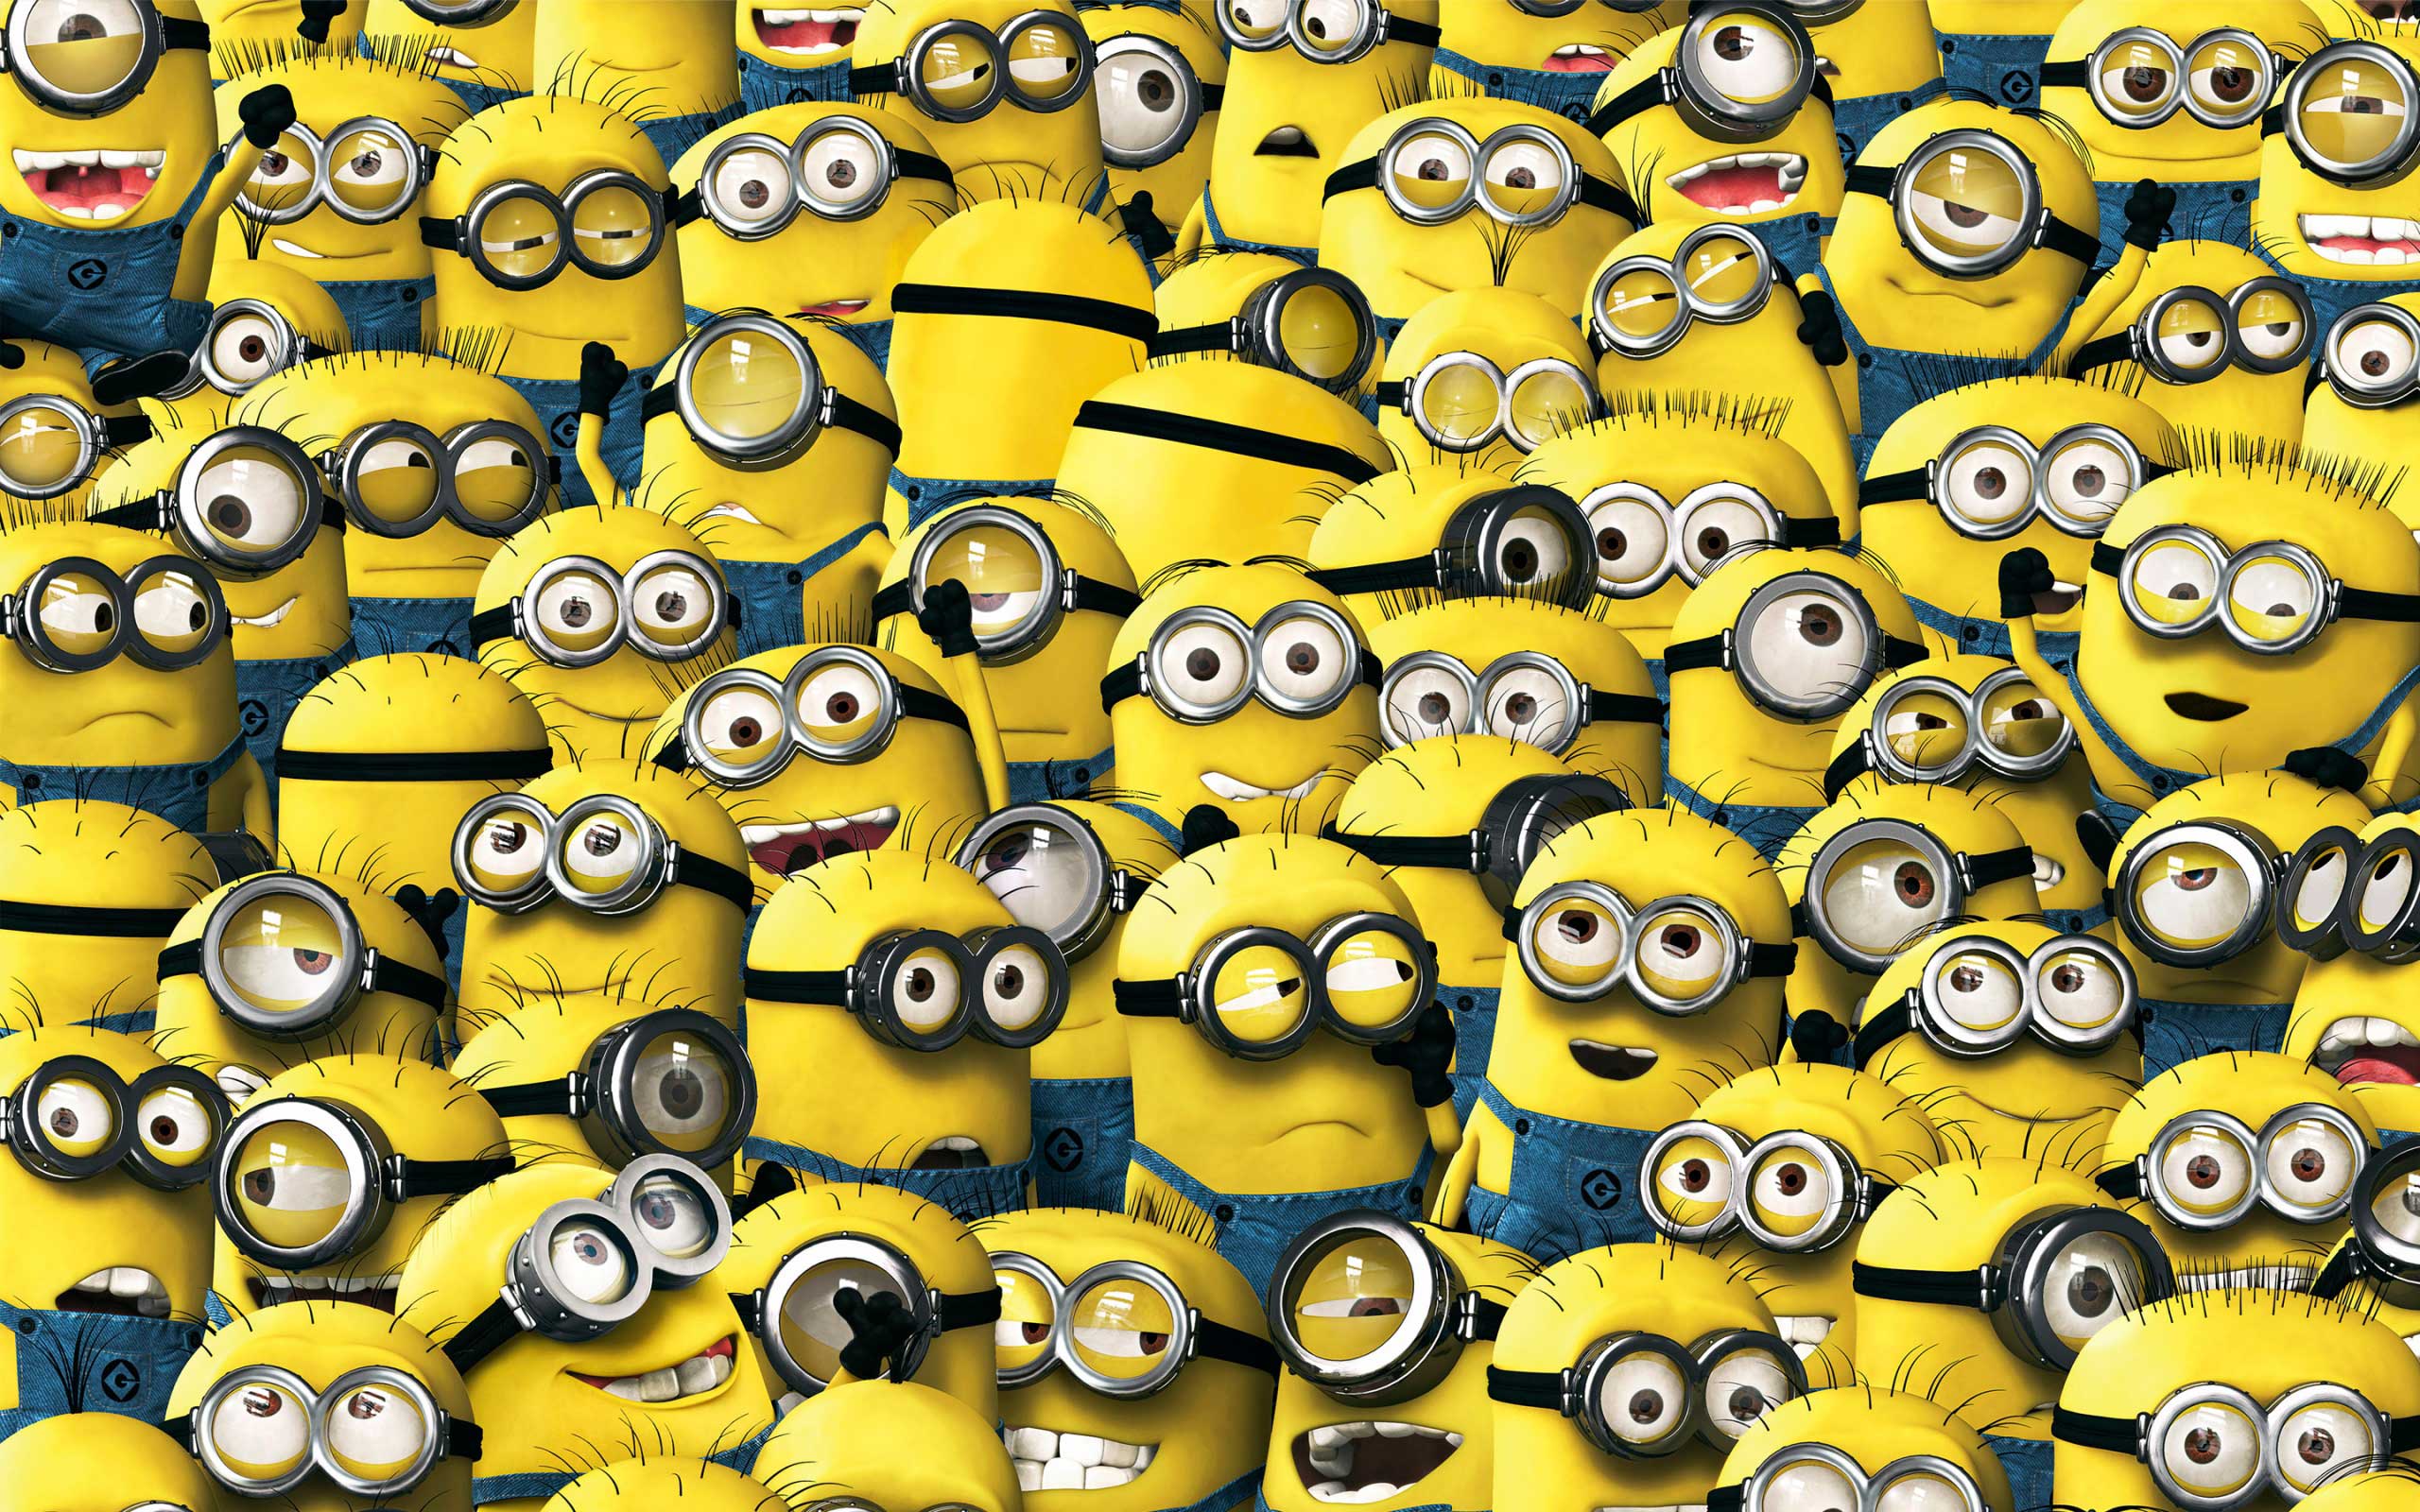 Cute-Minions-Wallpapers-Collection-005.jpg